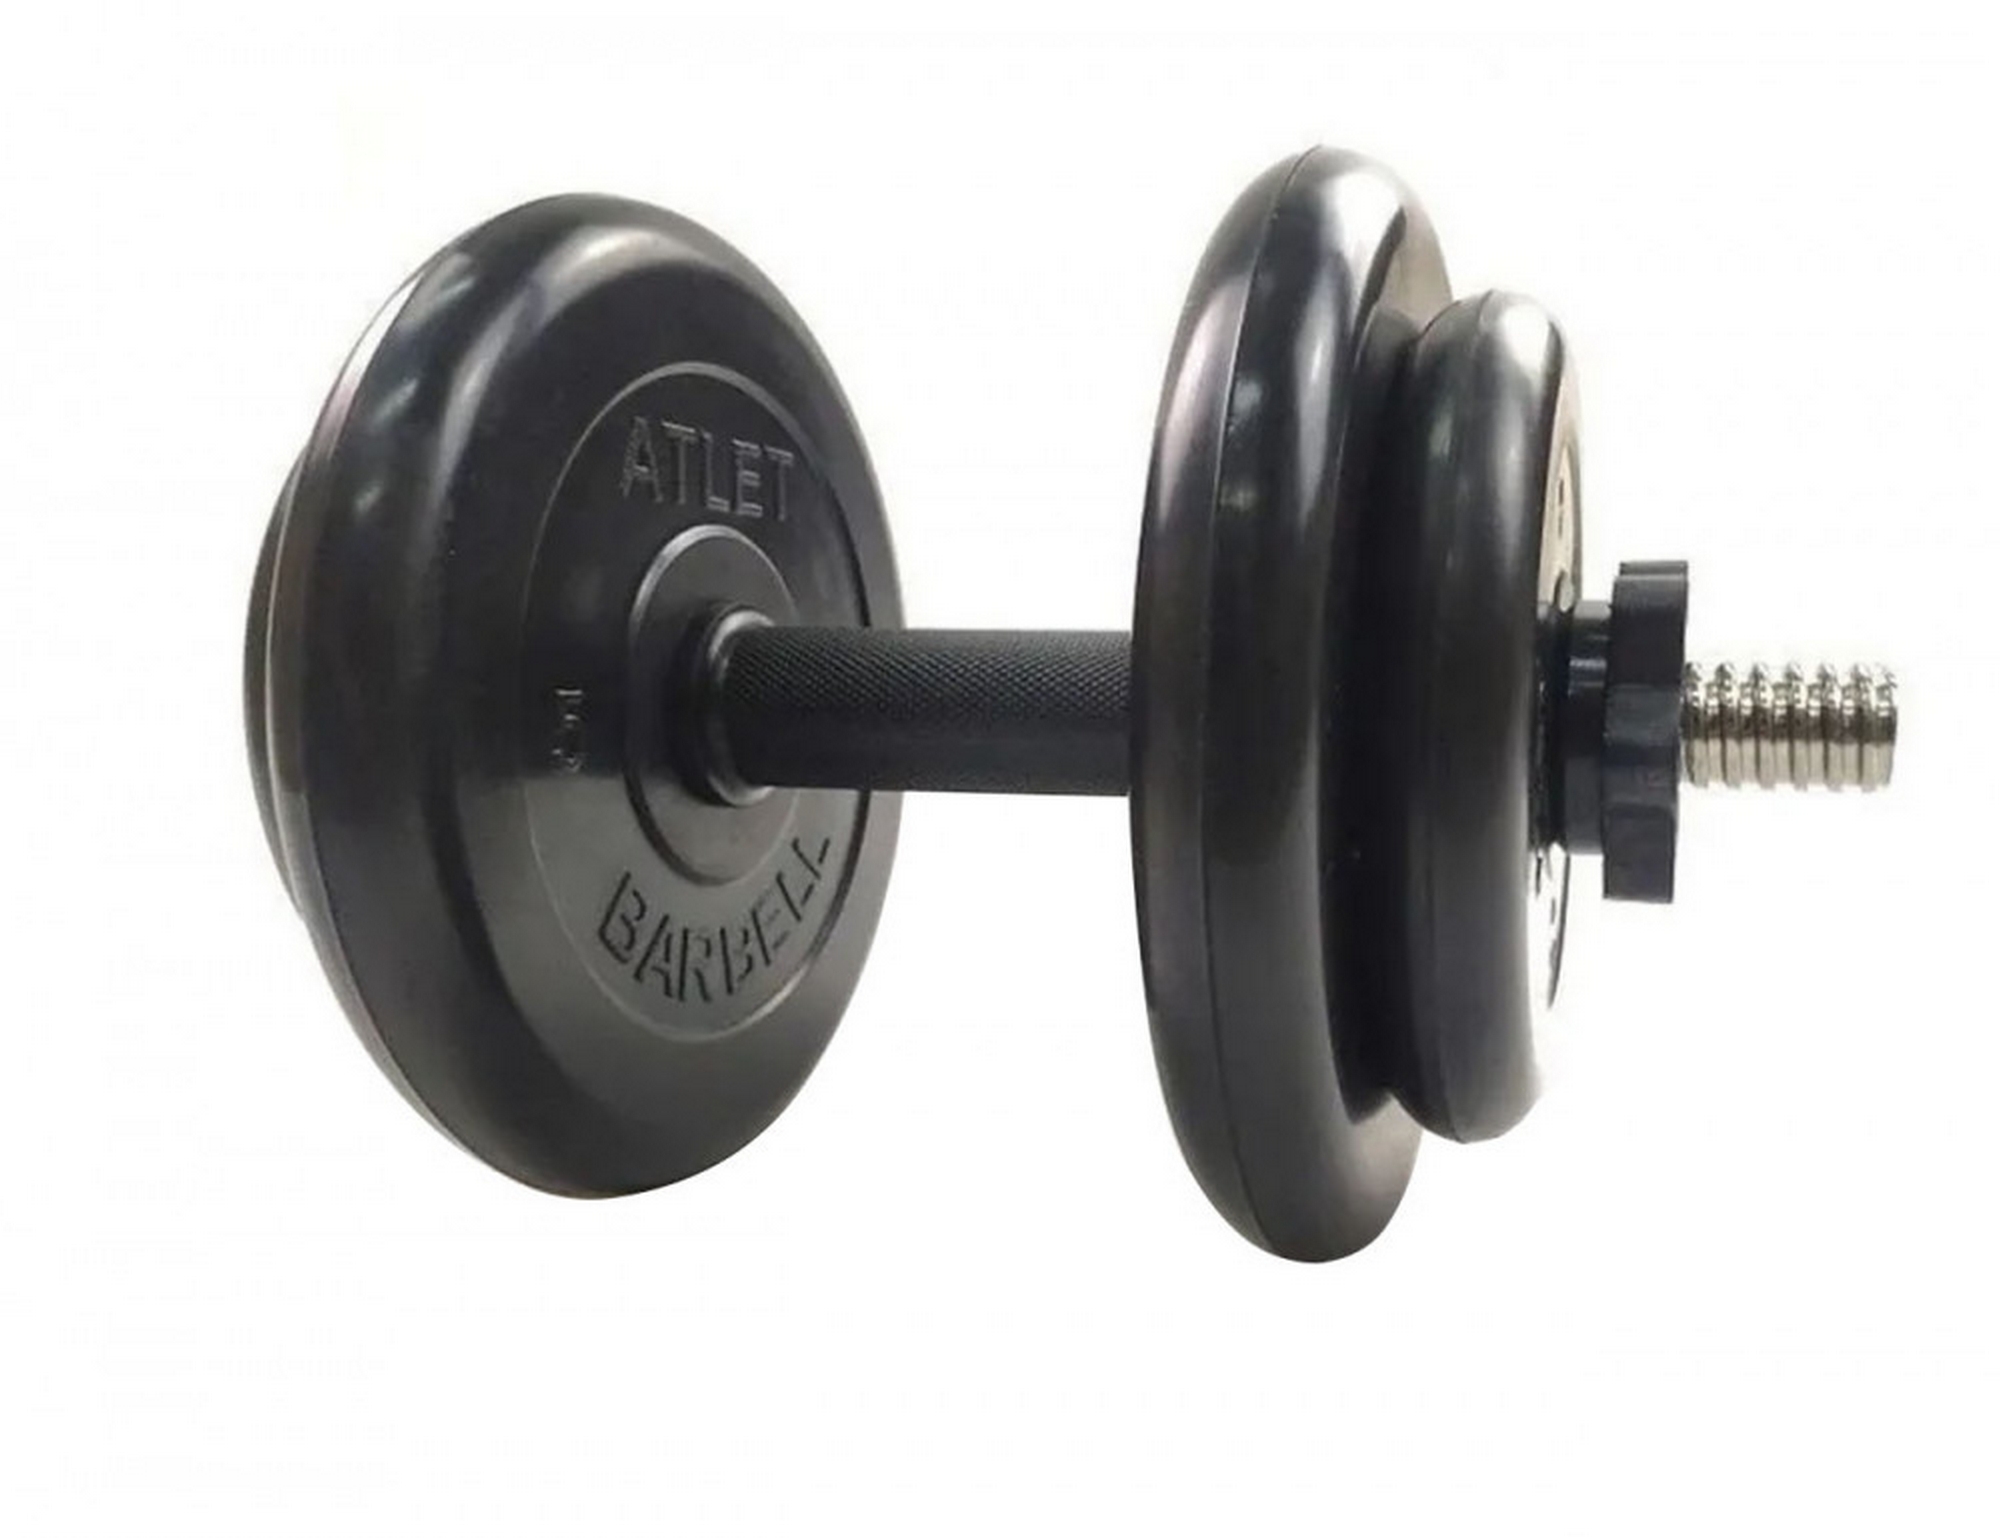   16, 5 MB Barbell  -16, 5